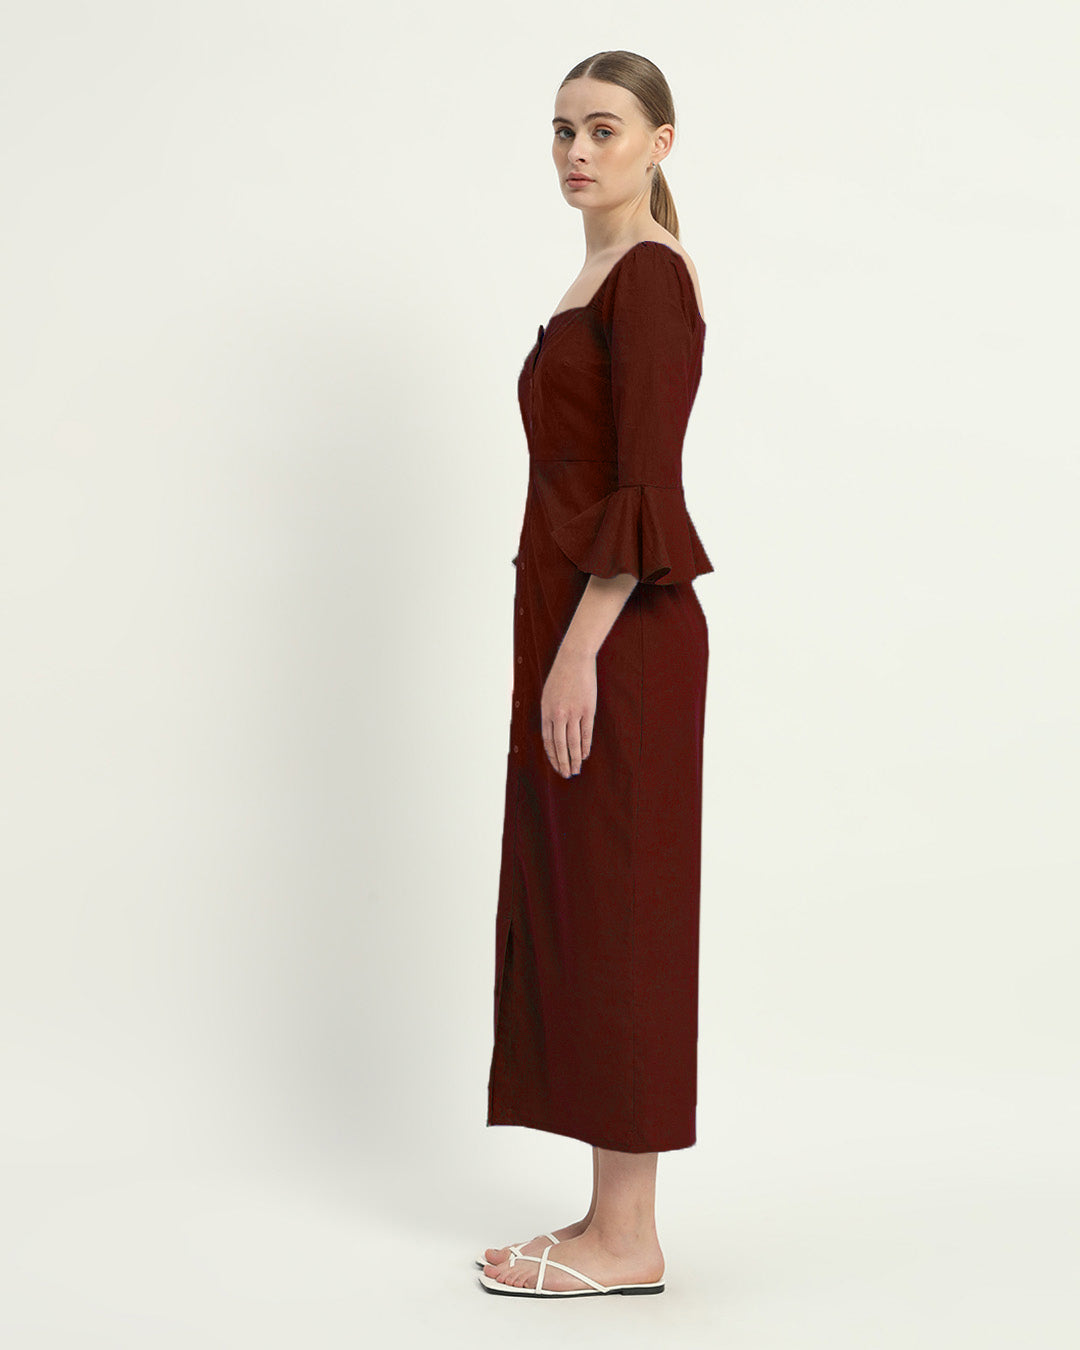 The Rosendale Rouge Cotton Dress